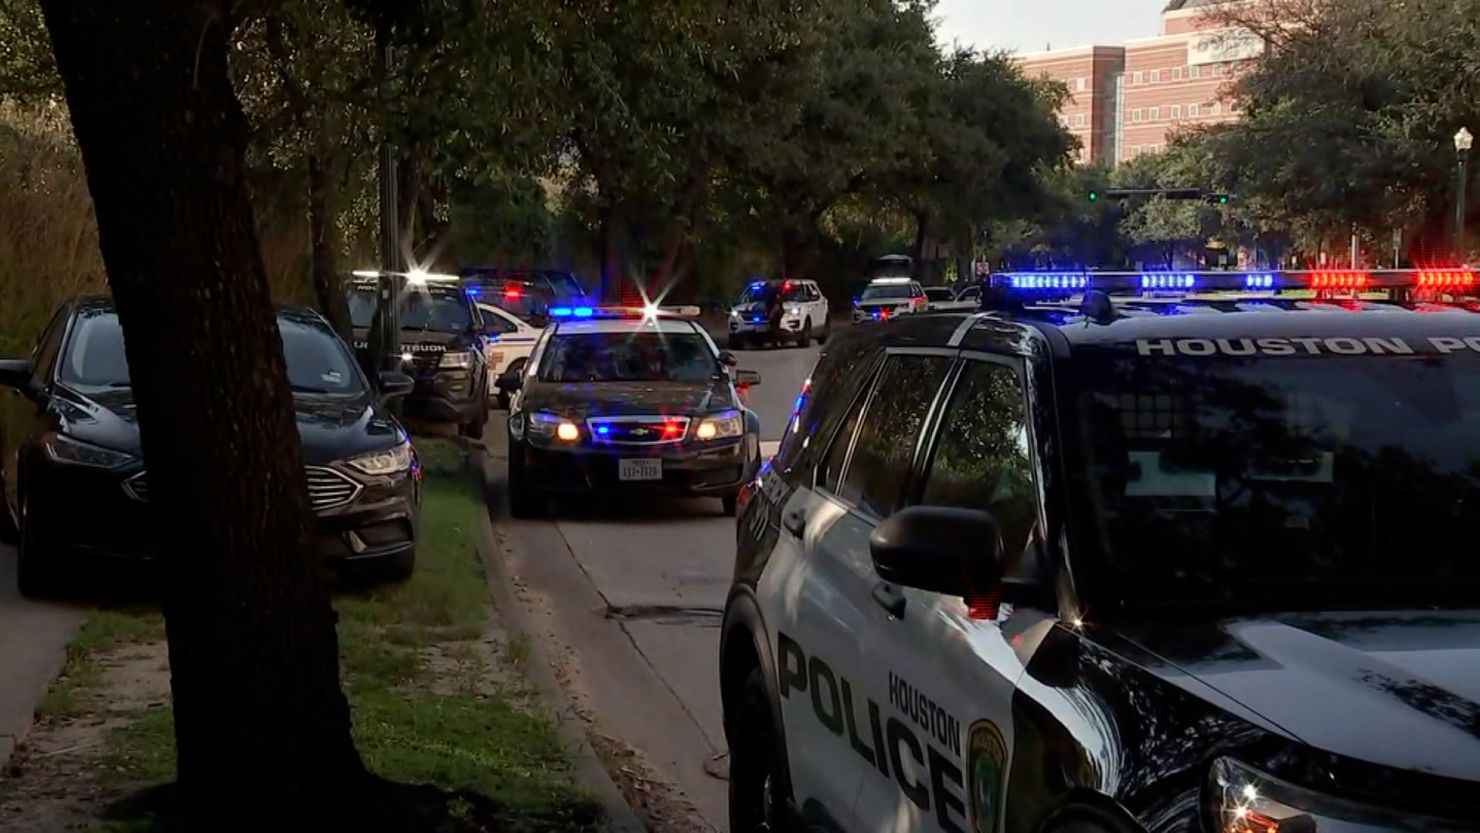 Police are responding to reports of two officers shot in Houston.